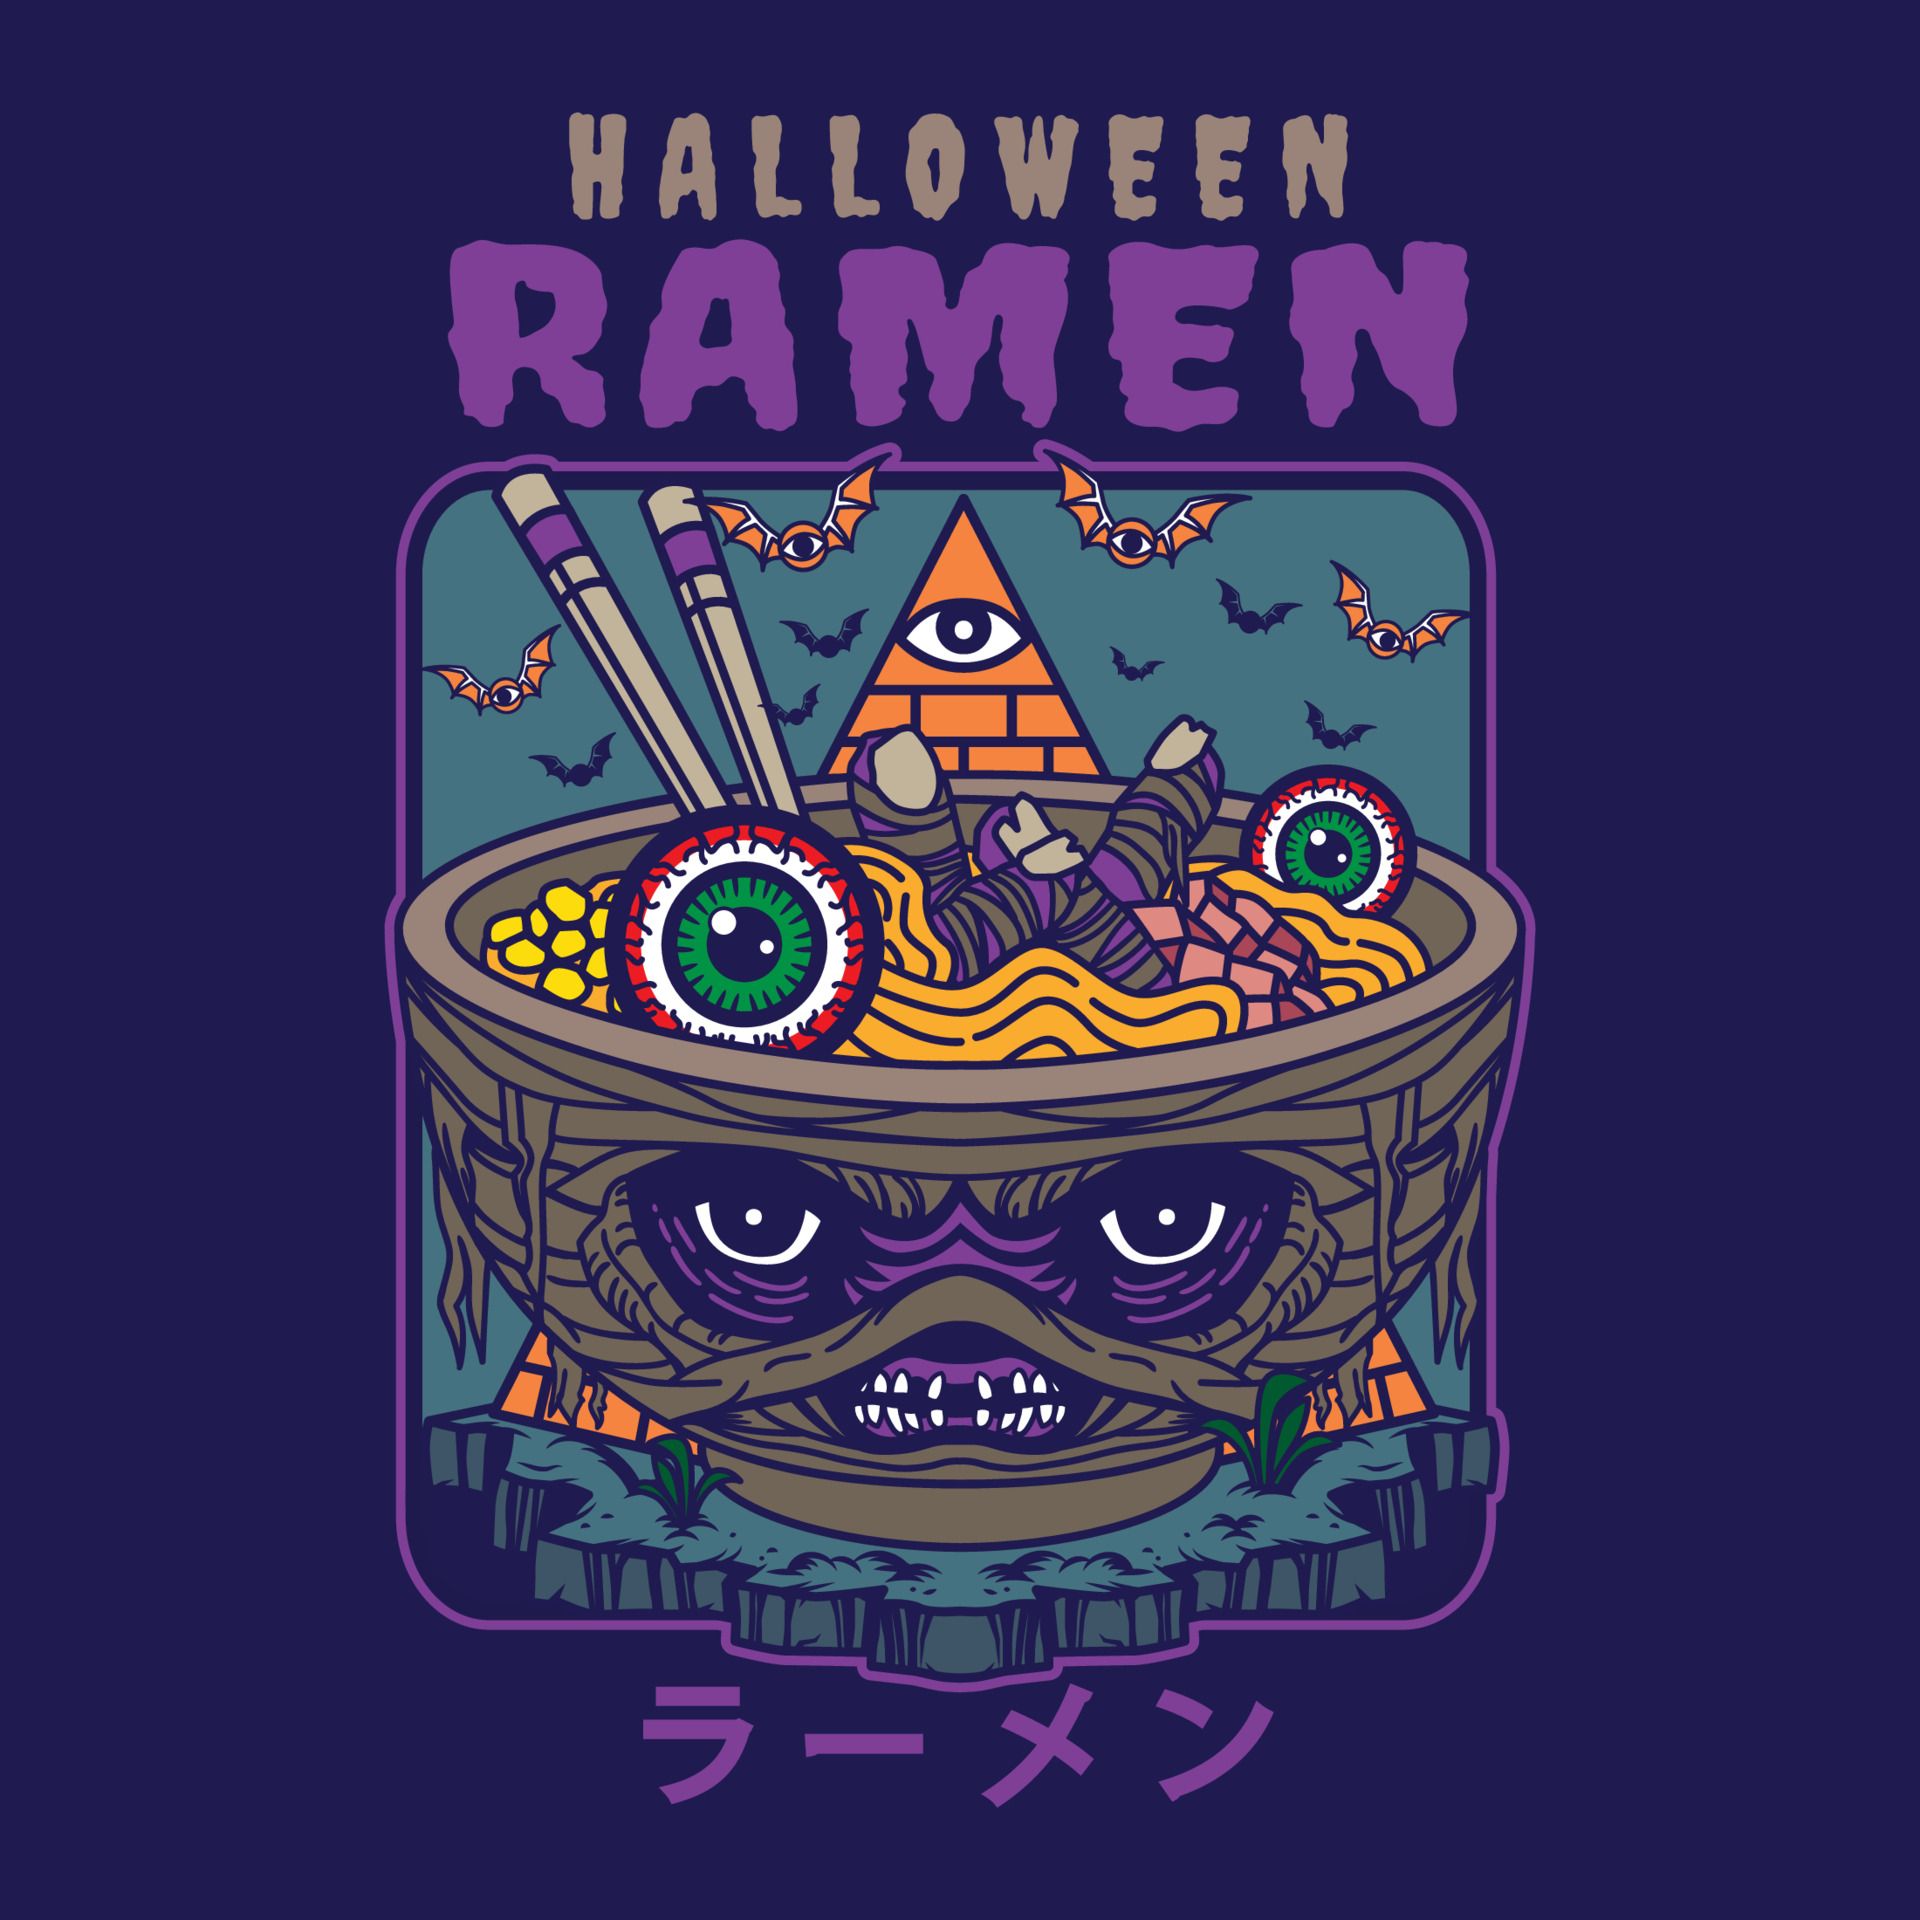 Illustration design of delicious japanese ramen noodle on bowl with halloween mummy vintage flat style. Good for logo, background, tshirt, banner